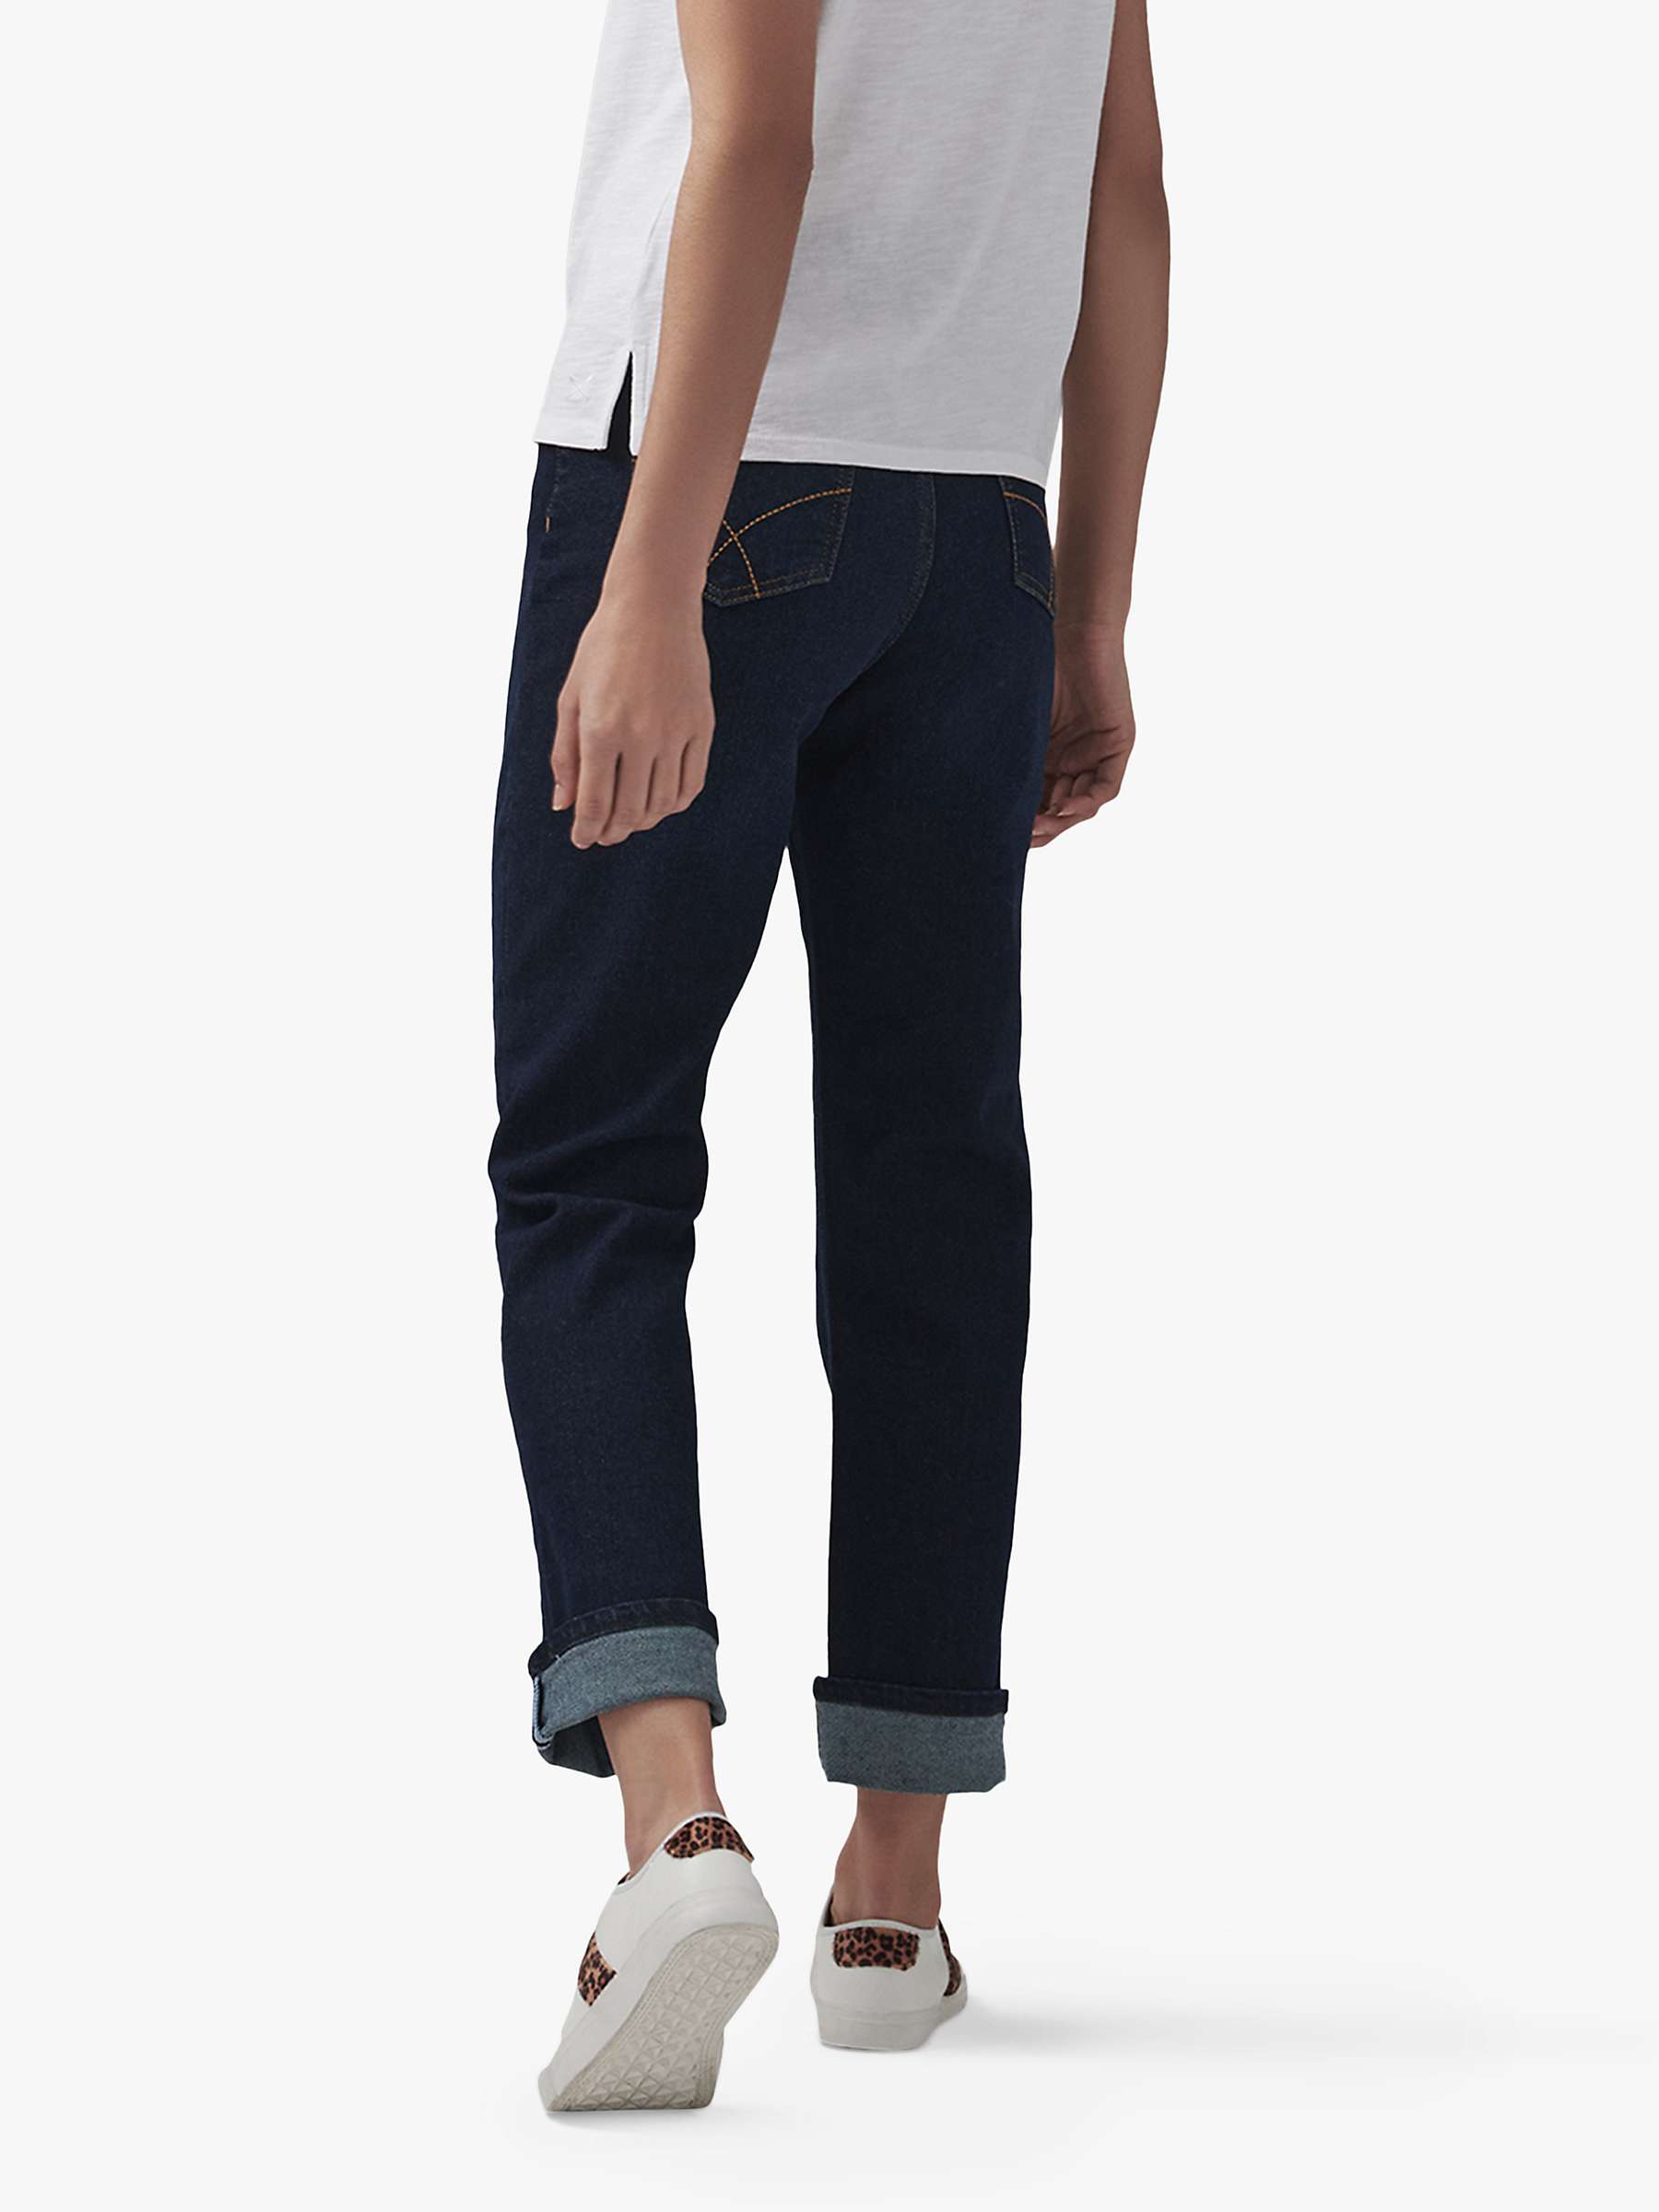 Buy Crew Clothing Girlfriend Jeans Online at johnlewis.com